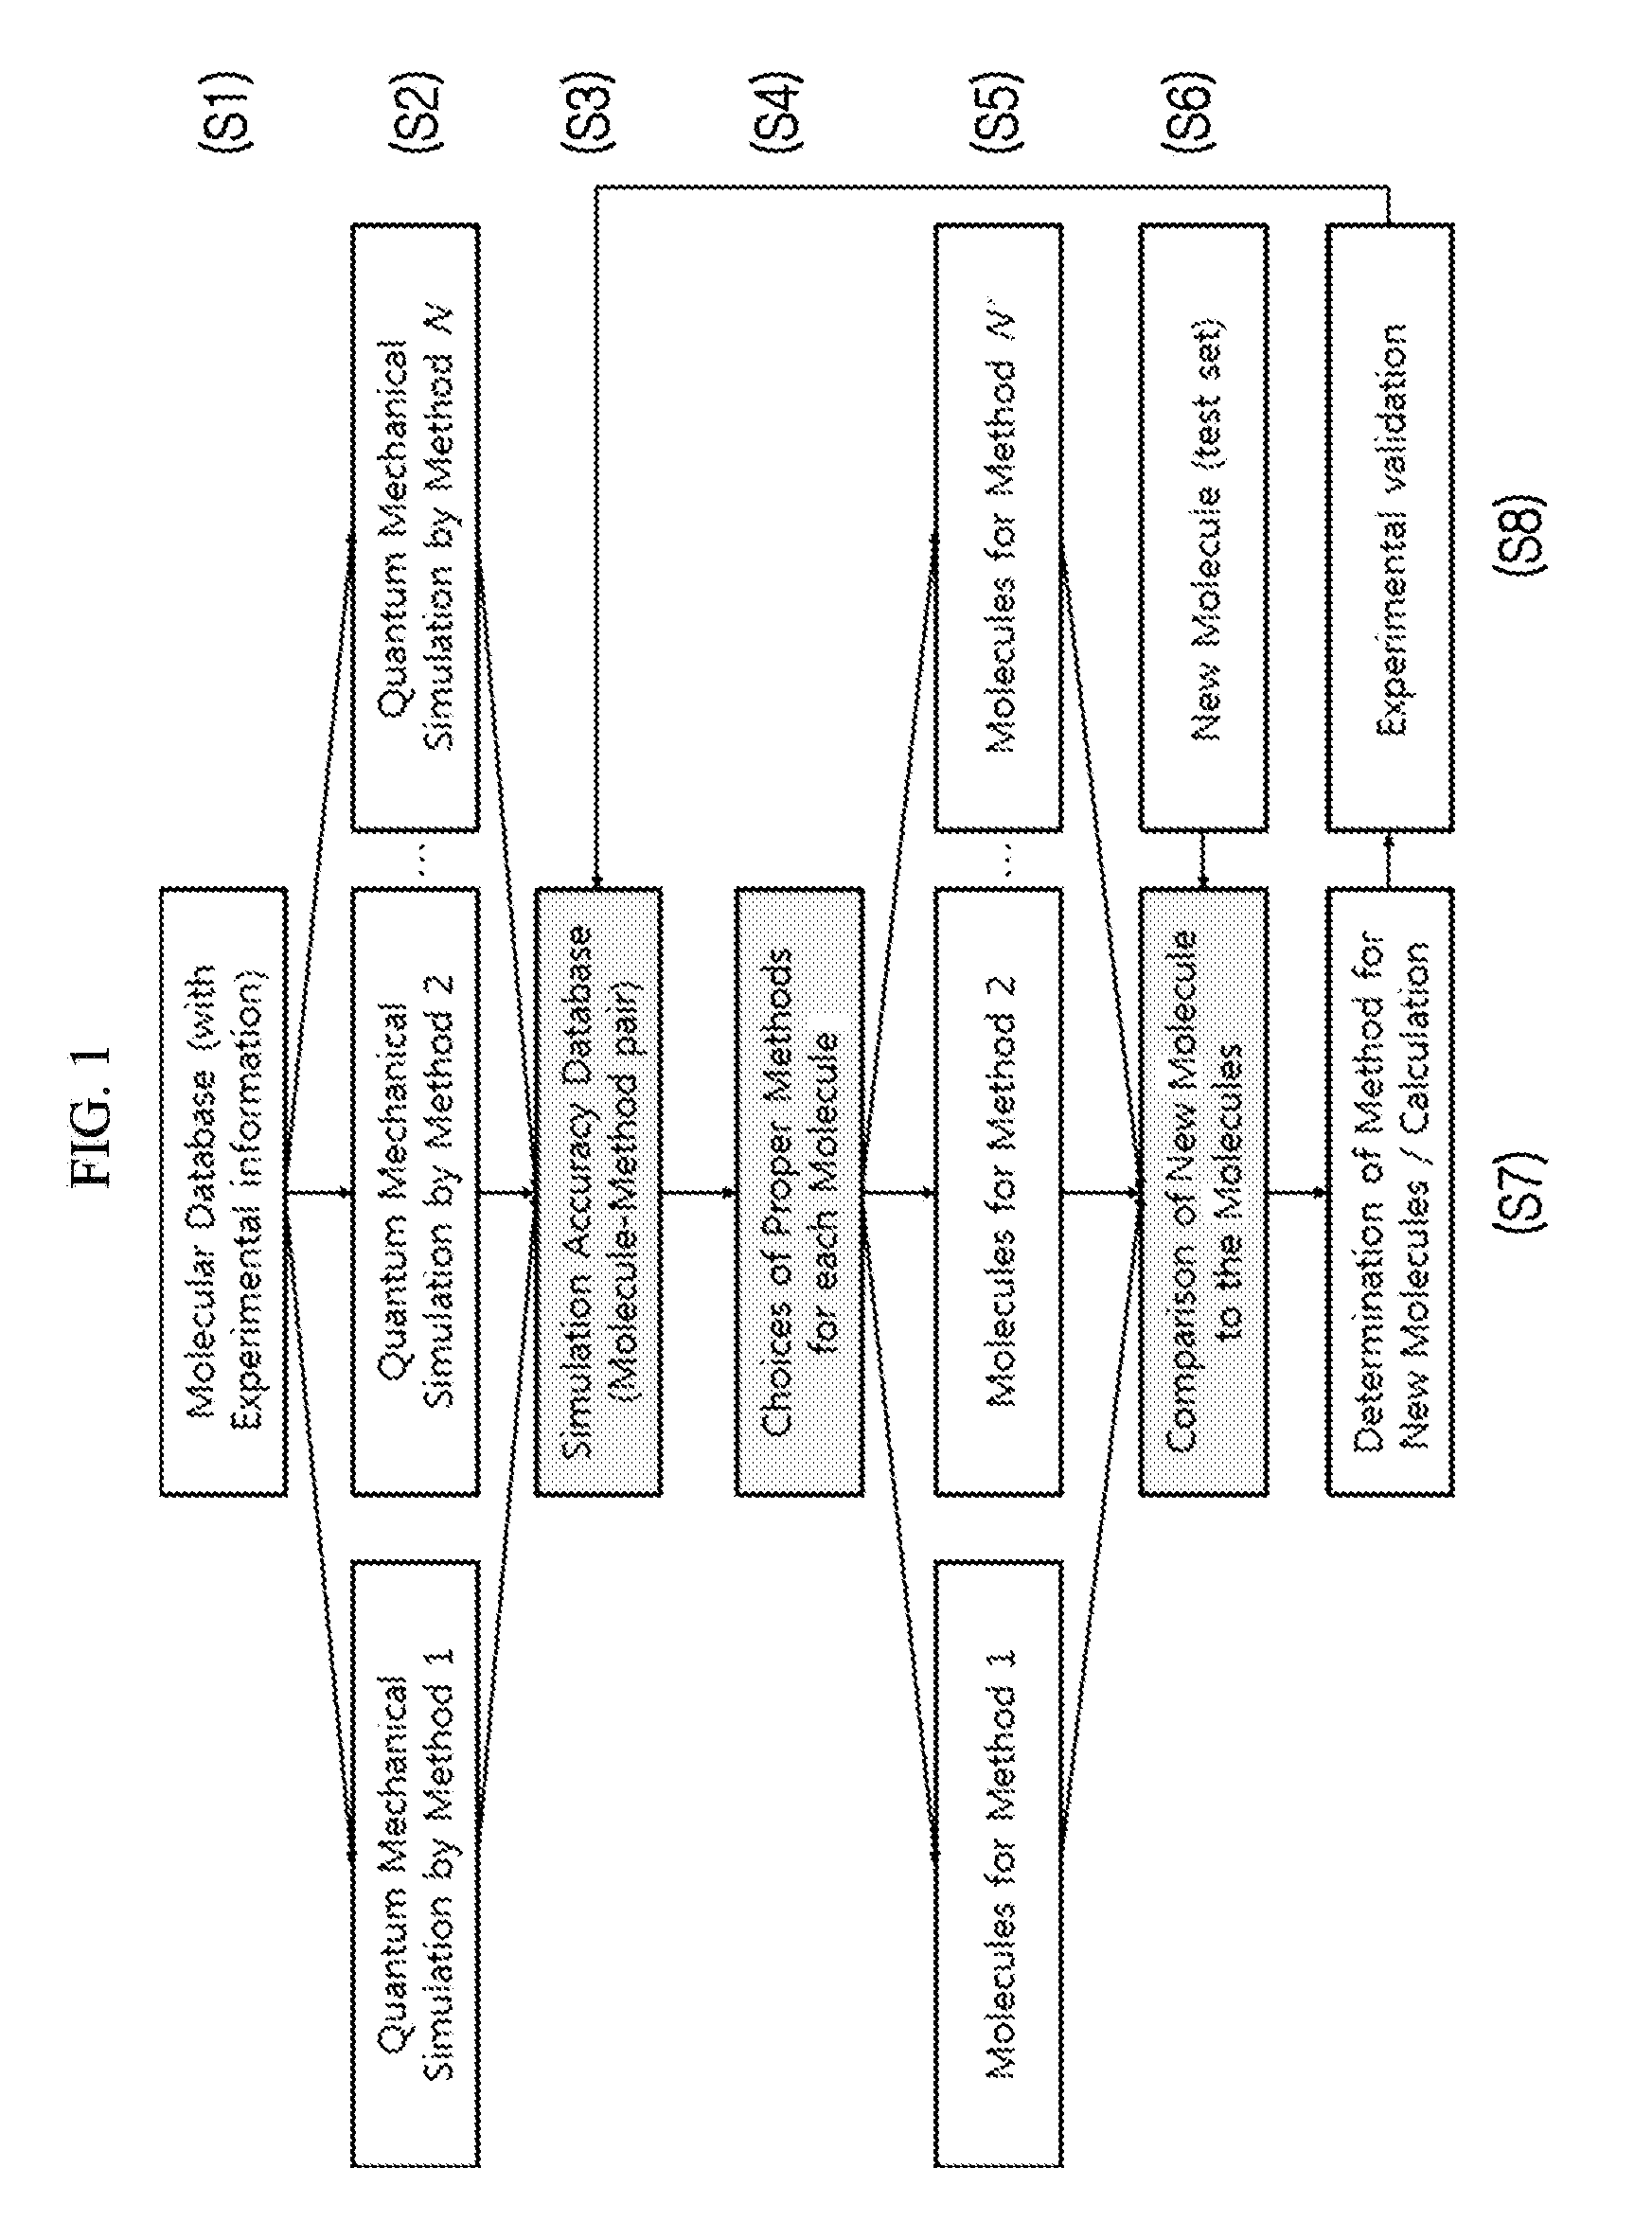 Methods and systems of computational analysis for predicting characteristics of compound